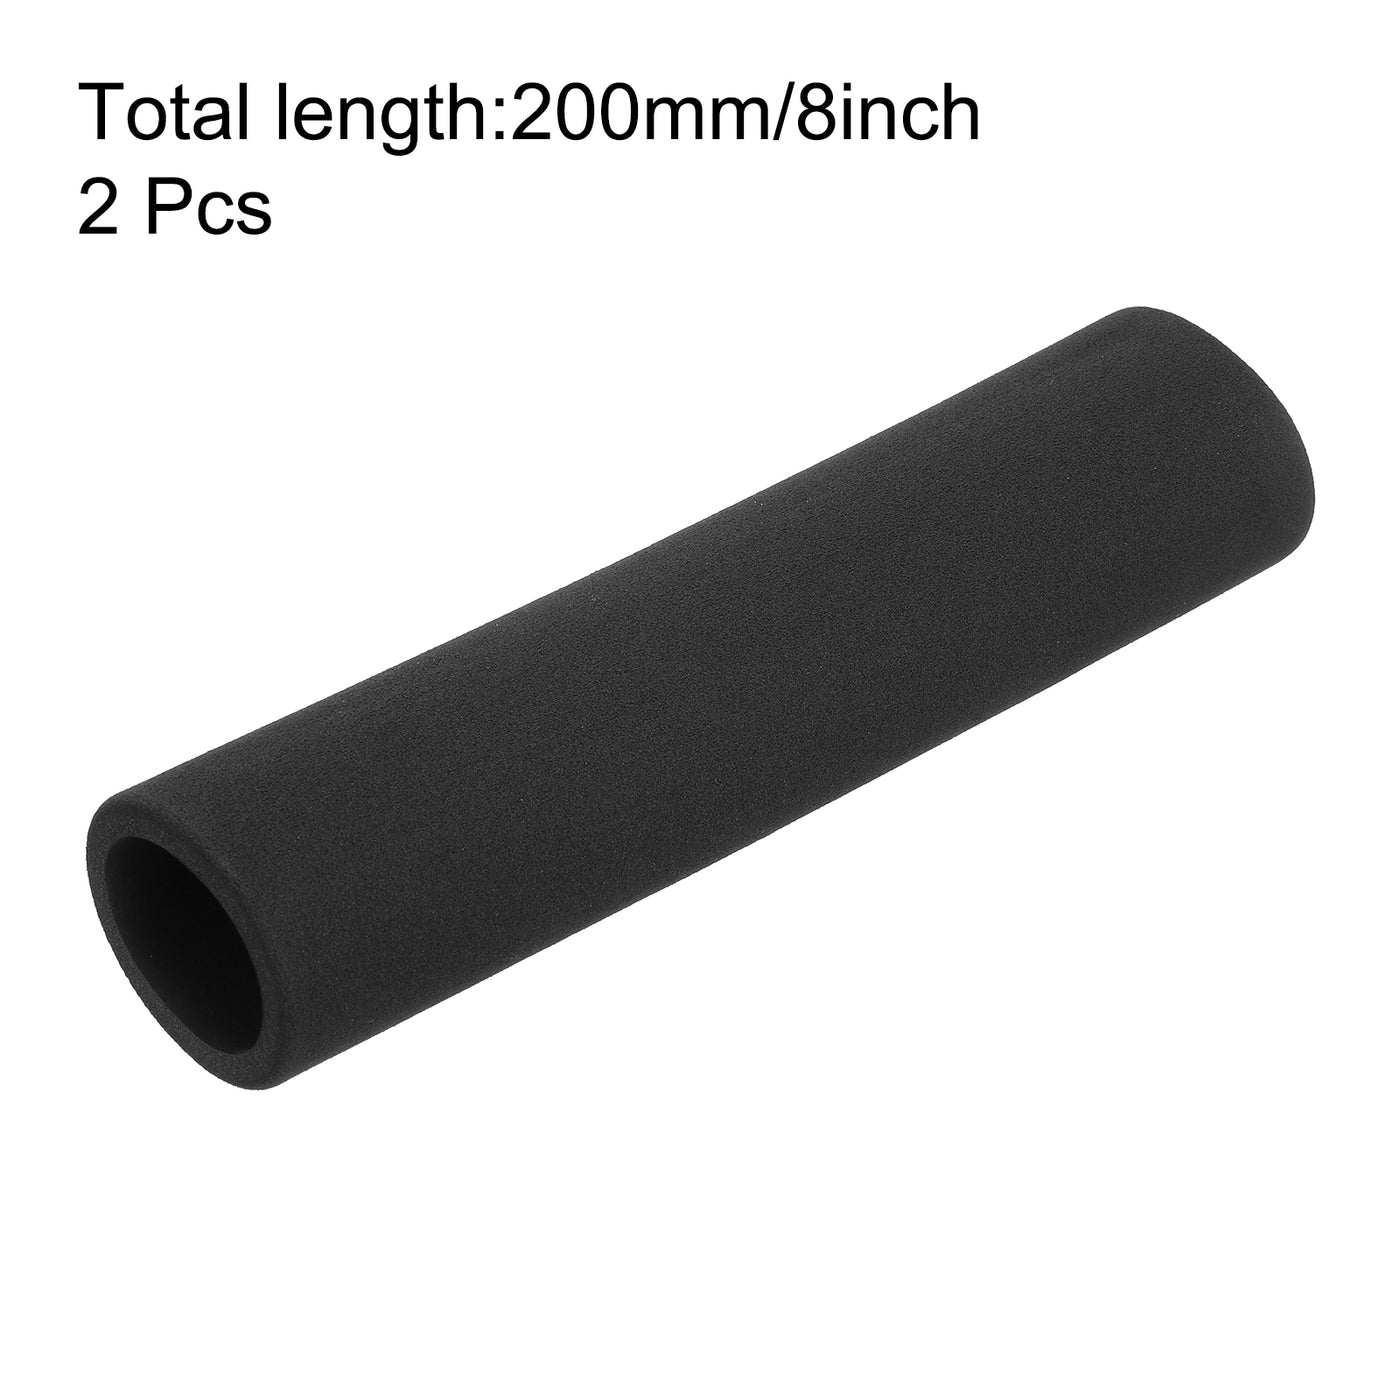 uxcell Uxcell Pipe Insulation Tube Foam Tubing for Handle Grip Support 35mm ID 47mm OD 200mm Heat Preservation Black 2pcs